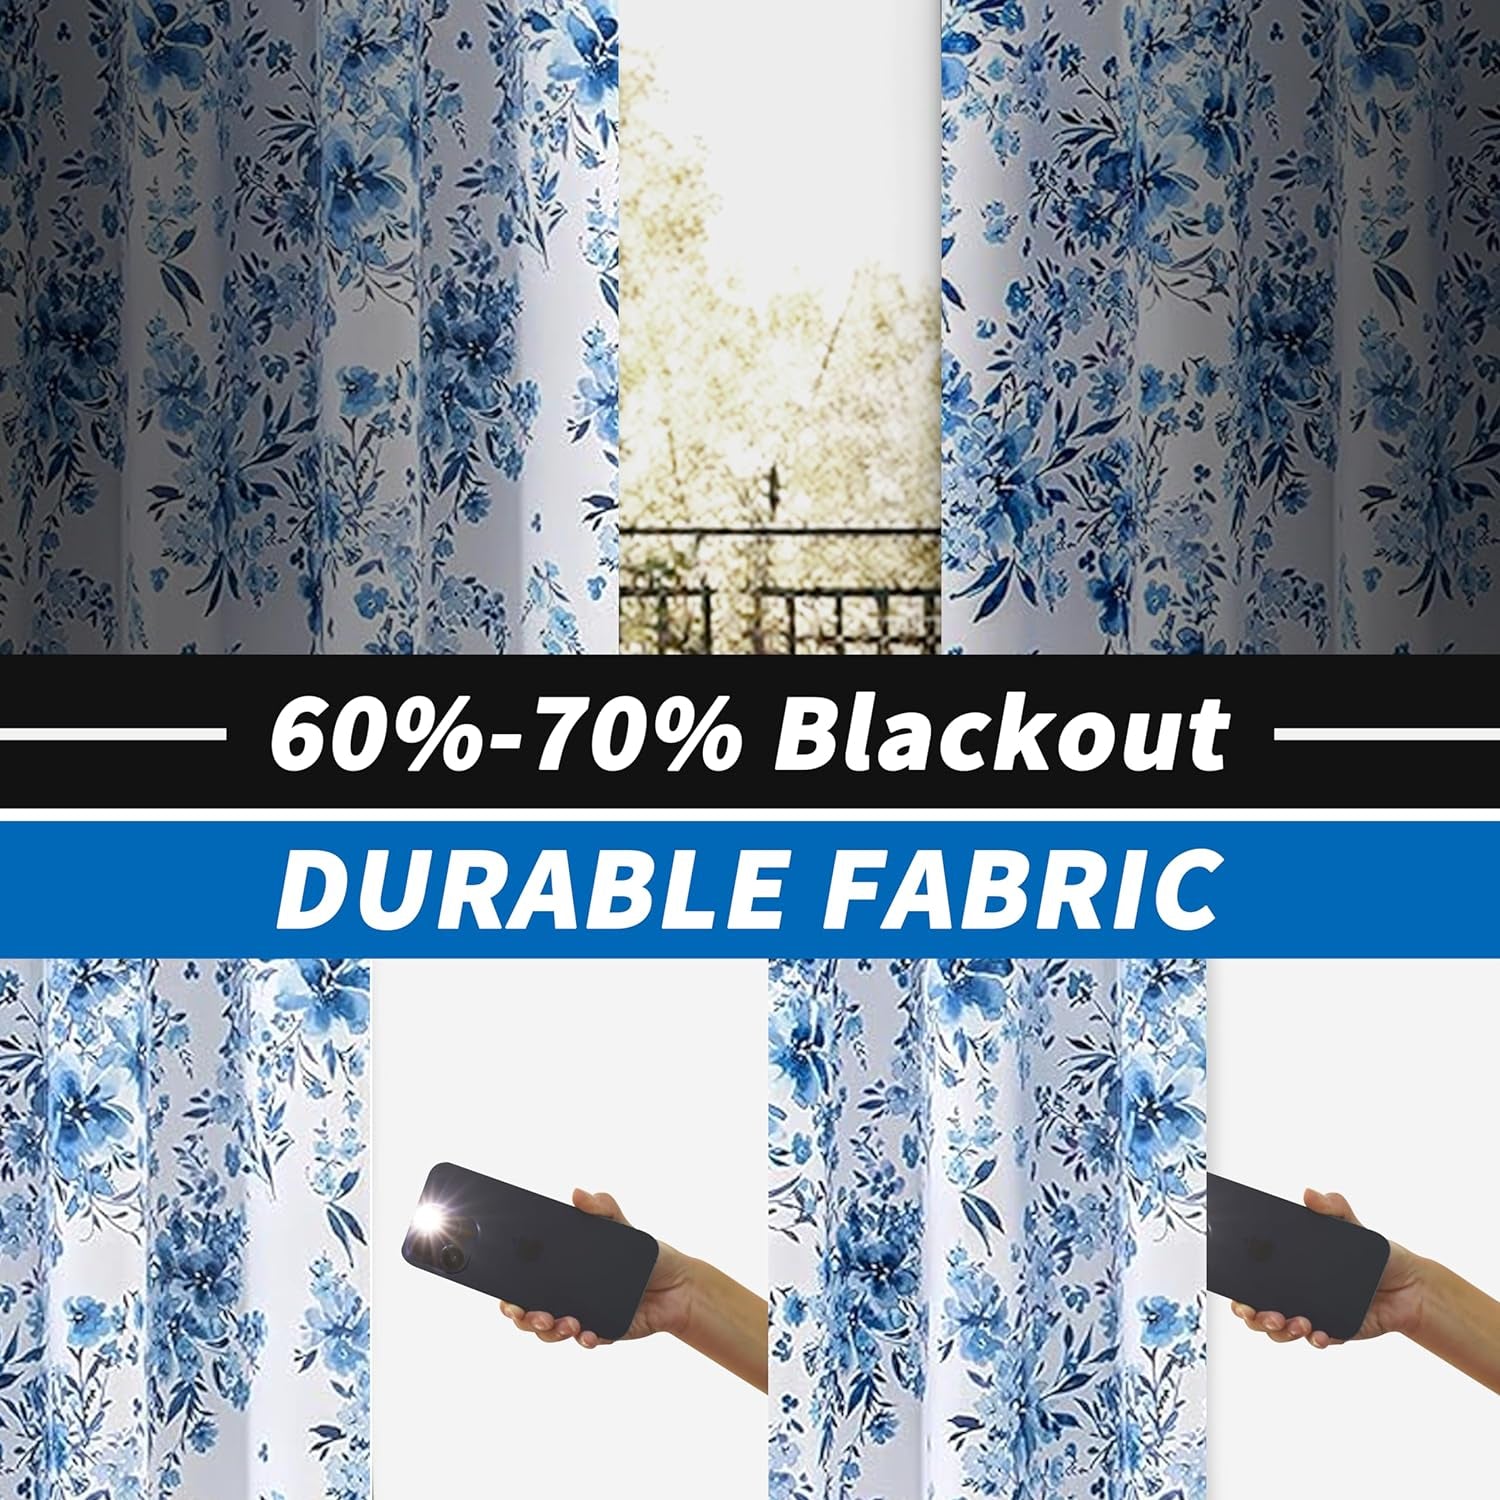 Driftaway Aubree Weeping Flower Print Thermal Room Darkening Privacy Window Curtain for Bedroom Living Room Rod Pocket 2 Panels 52 Inch by 84 Inch Blue  DriftAway   